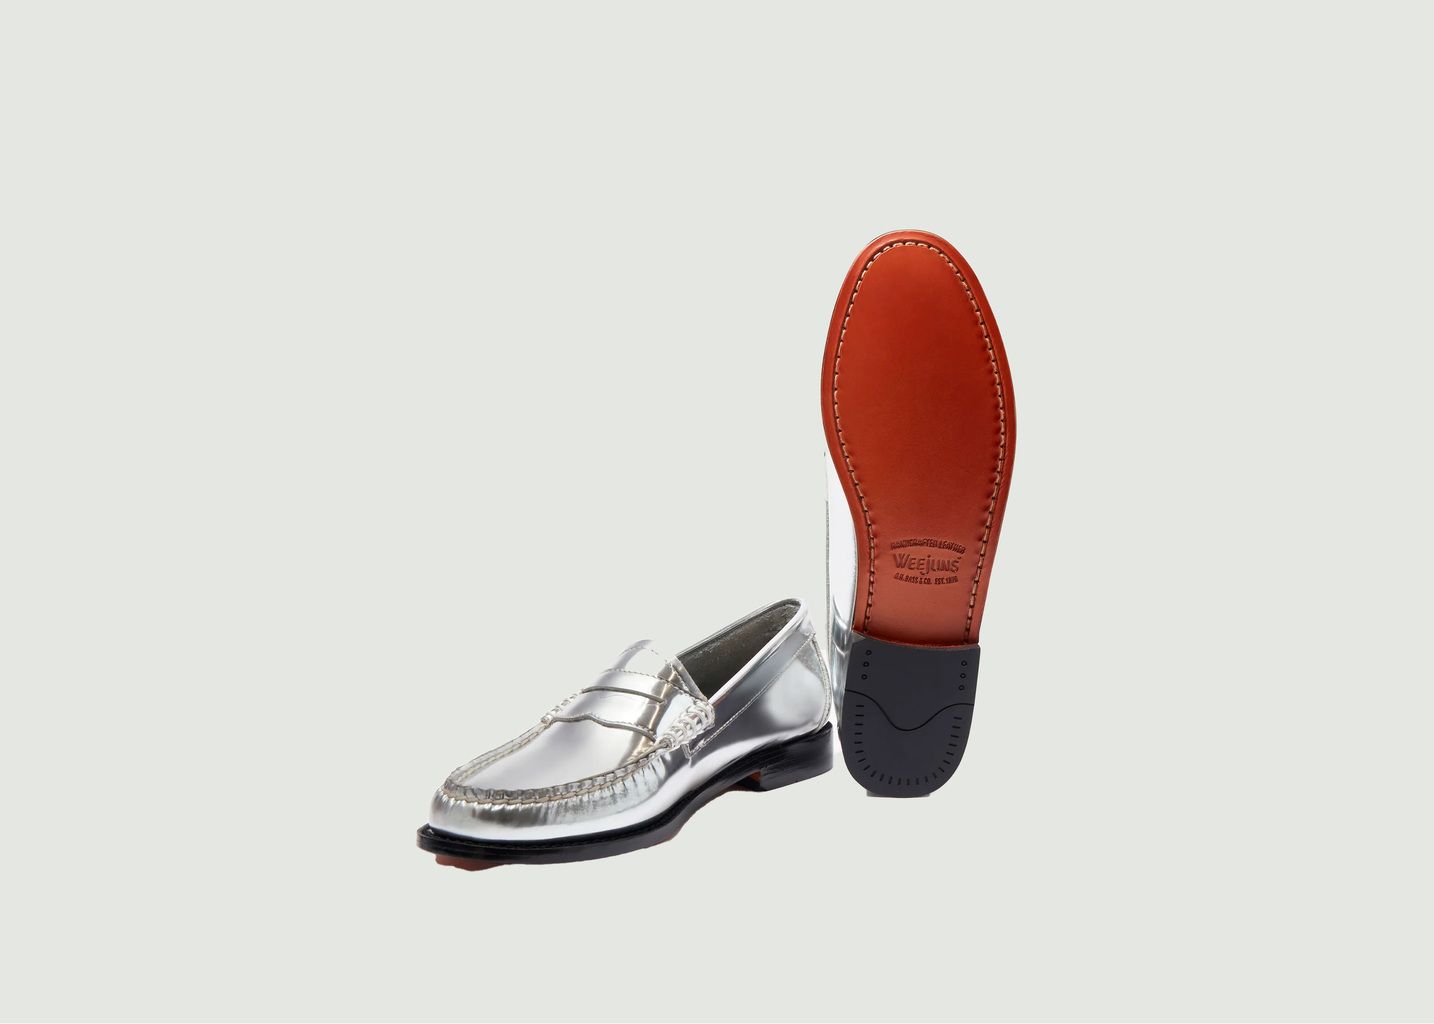 Weejun Penny Loafer - G.H.Bass